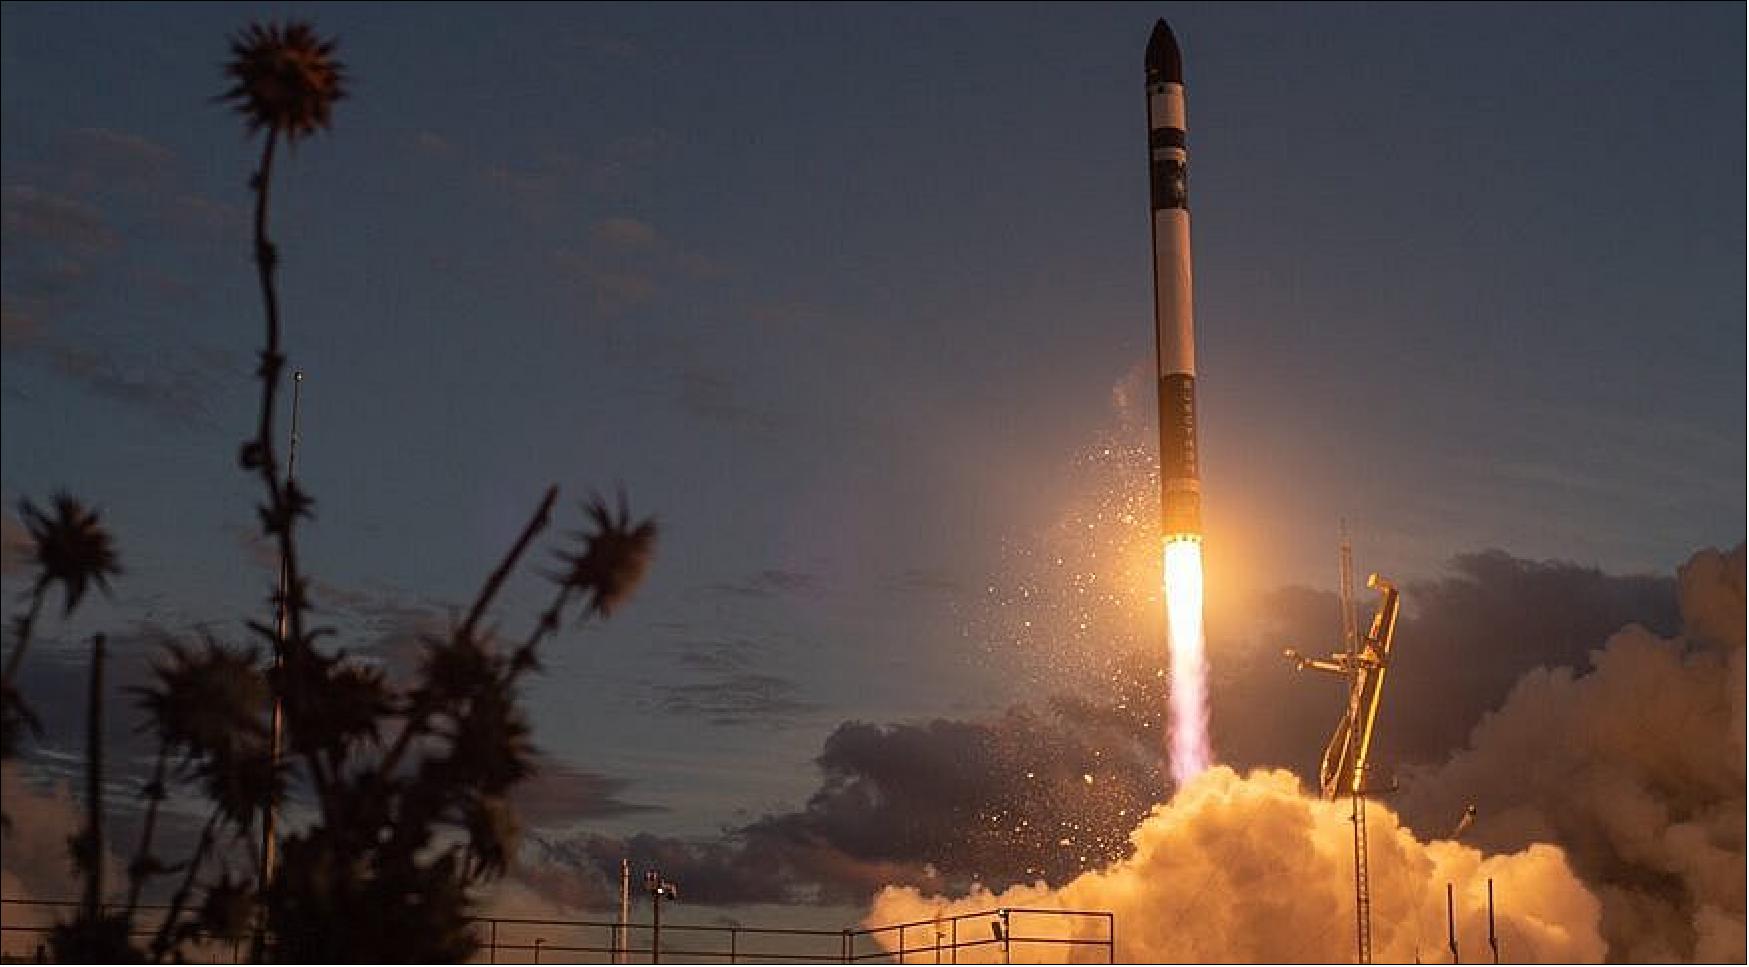 Figure 32: A Rocket Lab Electron lifts off Jan. 20 from Launch Complex 1 carrying the GMS-T communications satellite built by OHB (image credit: Rocket Lab)